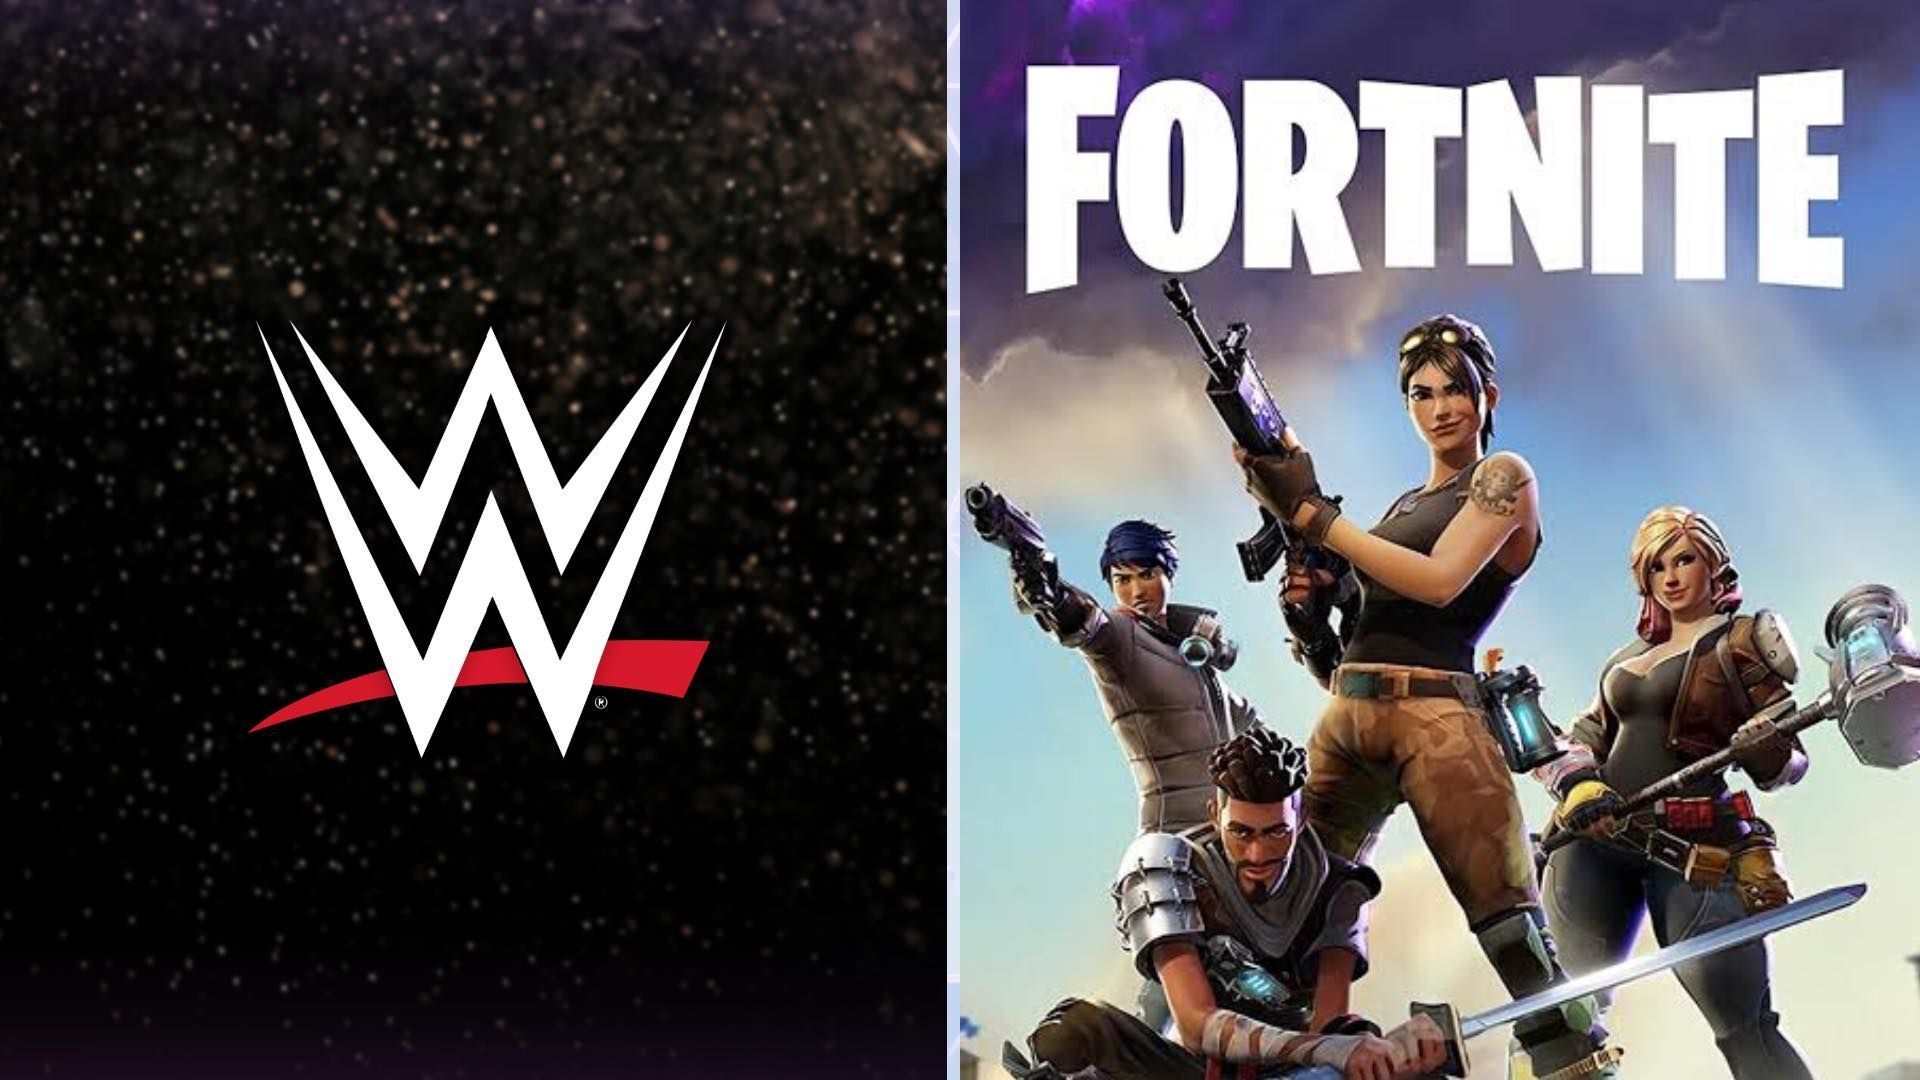 The logos of WWE and Fortnite 